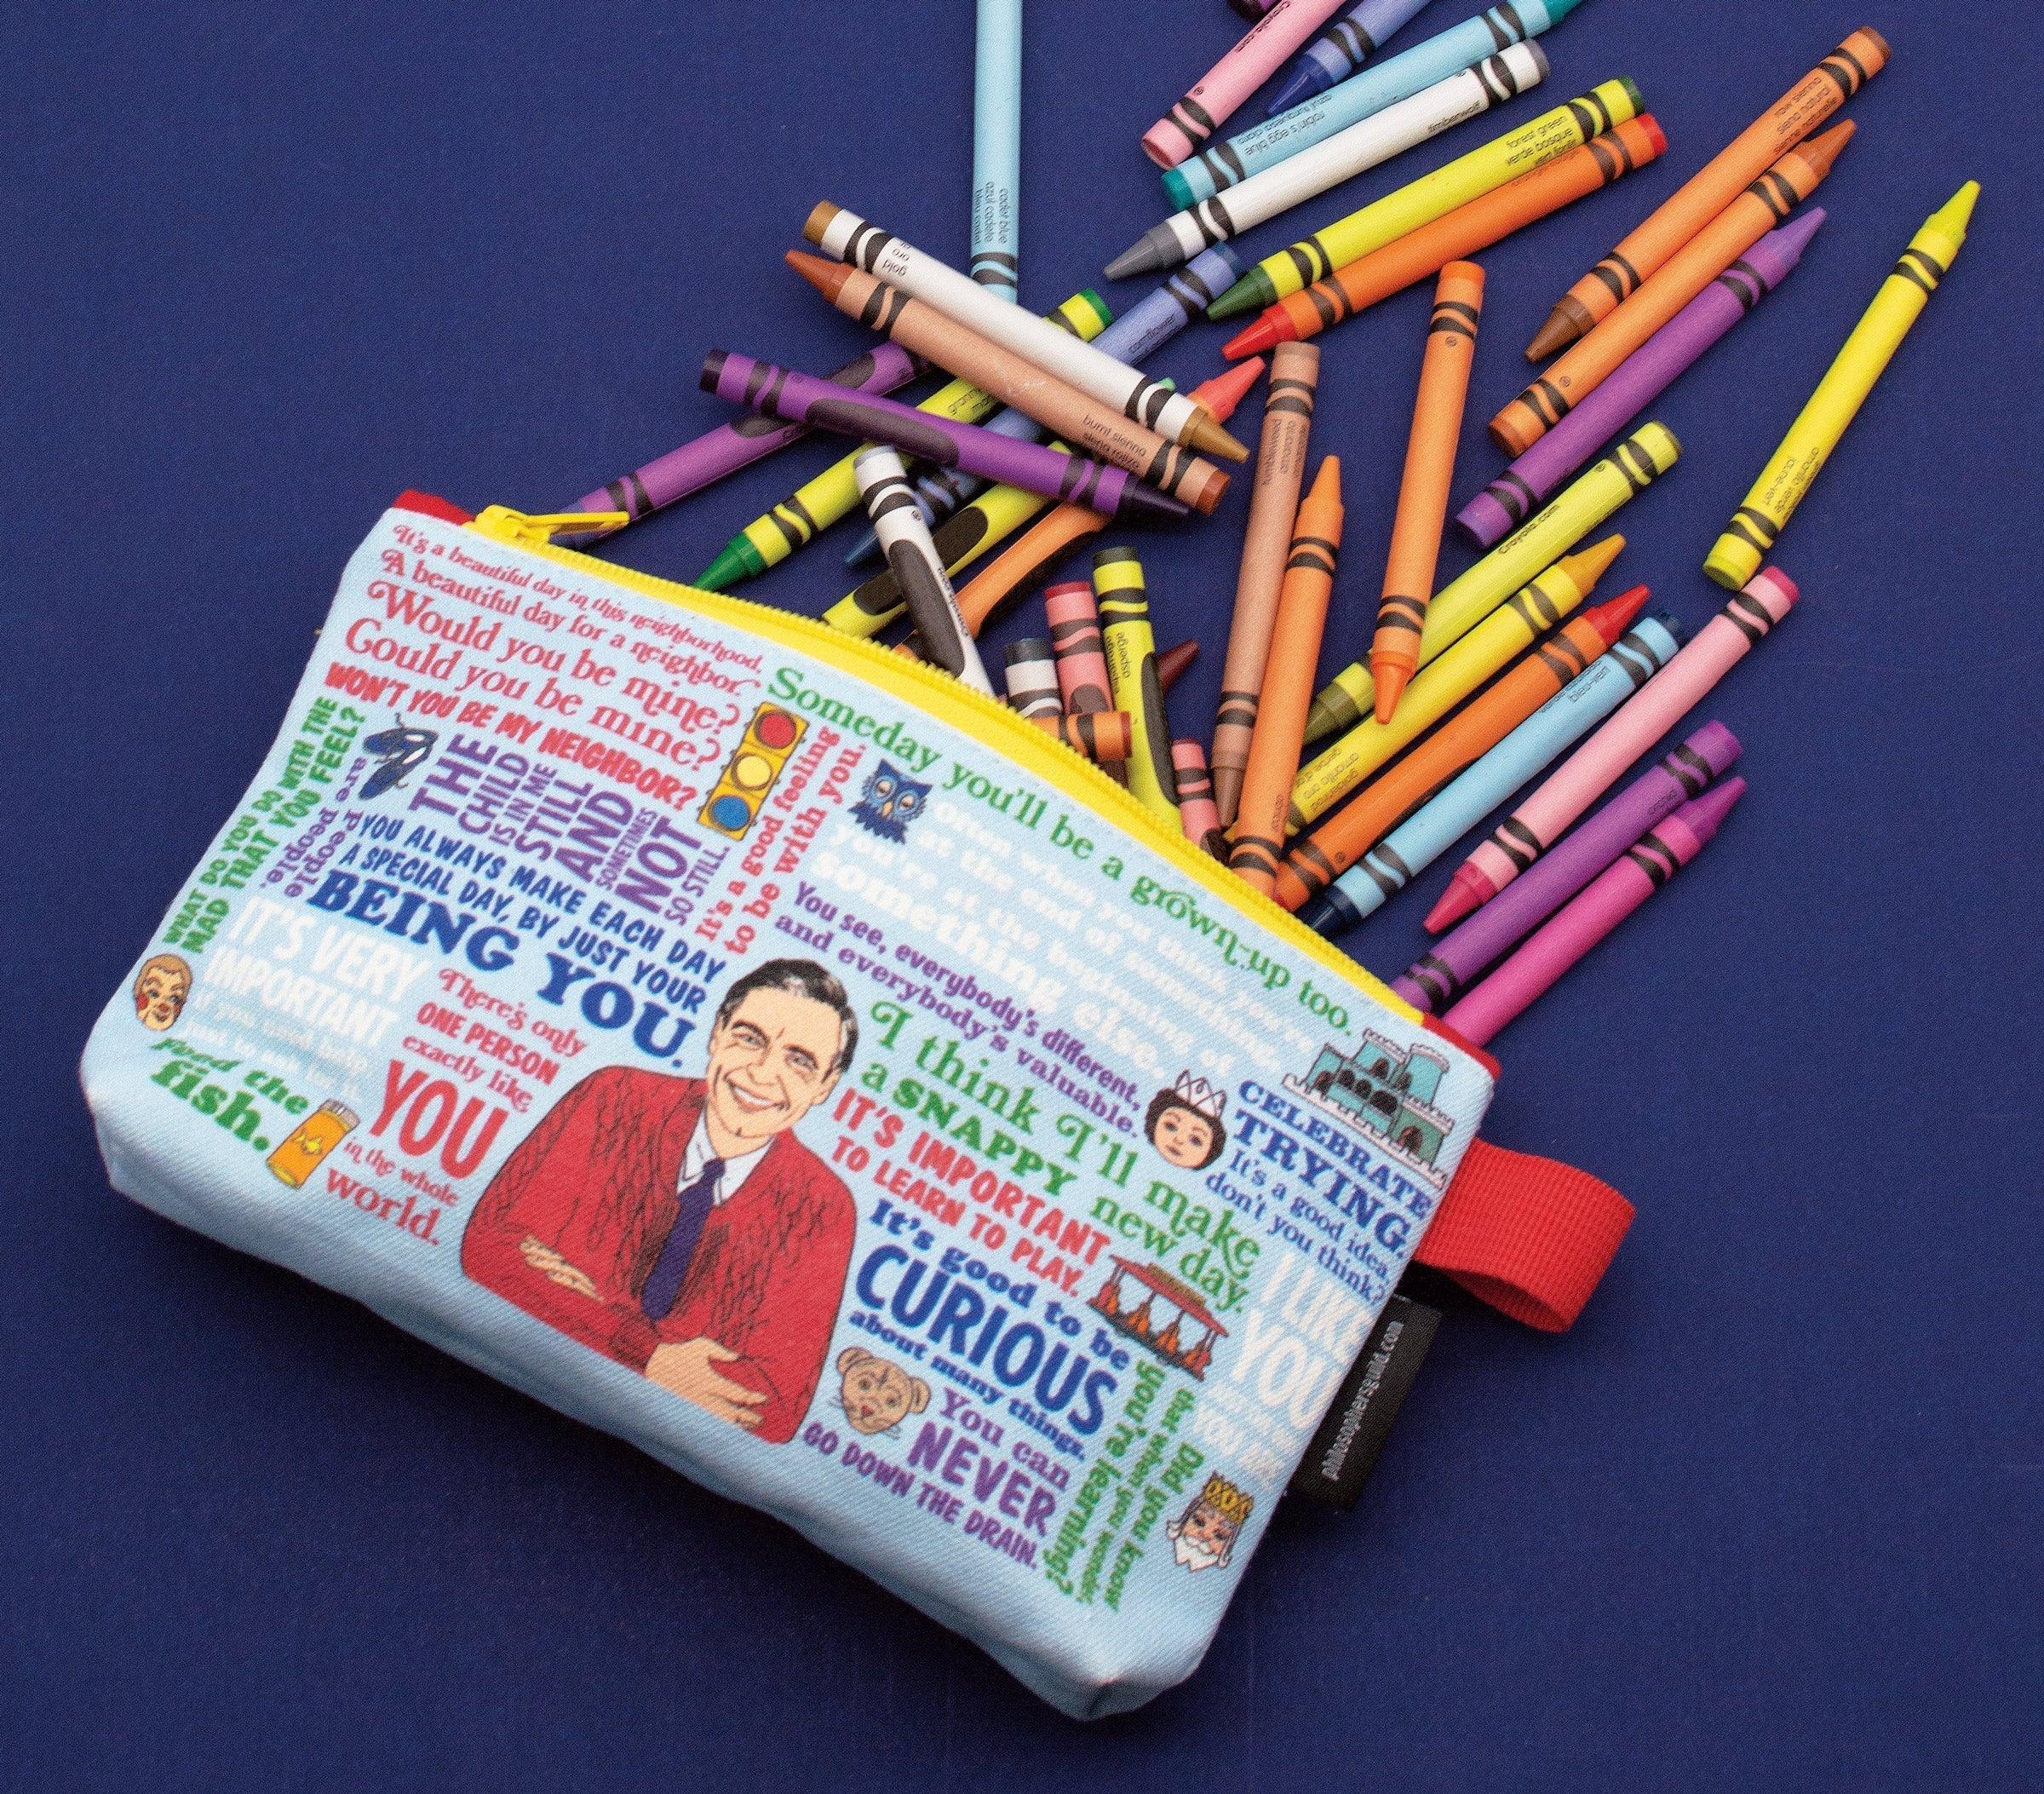 Product photo of Mister Rogers Quotes Zipper Bag, a novelty gift manufactured by The Unemployed Philosophers Guild.